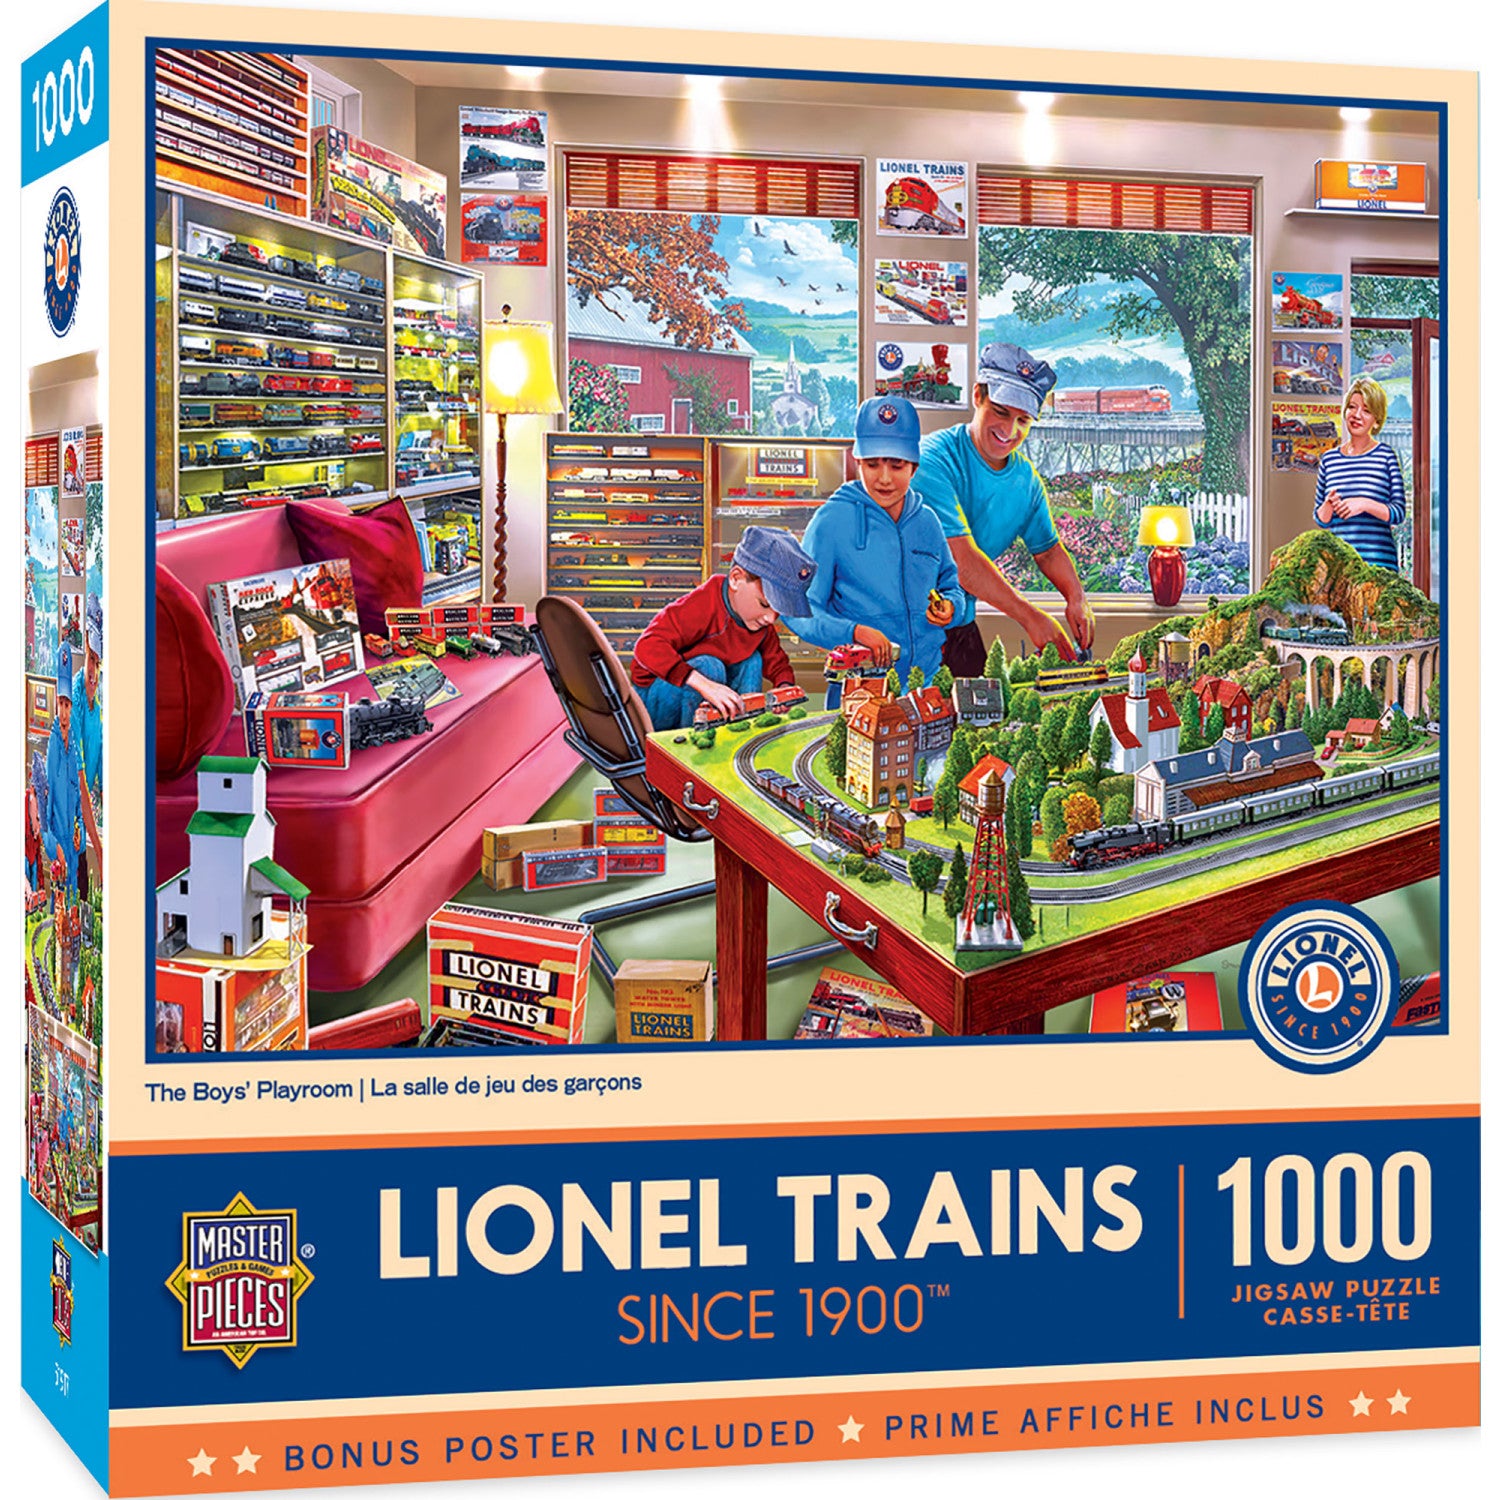 Lionel Trains - The Boy's Playroom 1000 Piece Jigsaw Puzzle